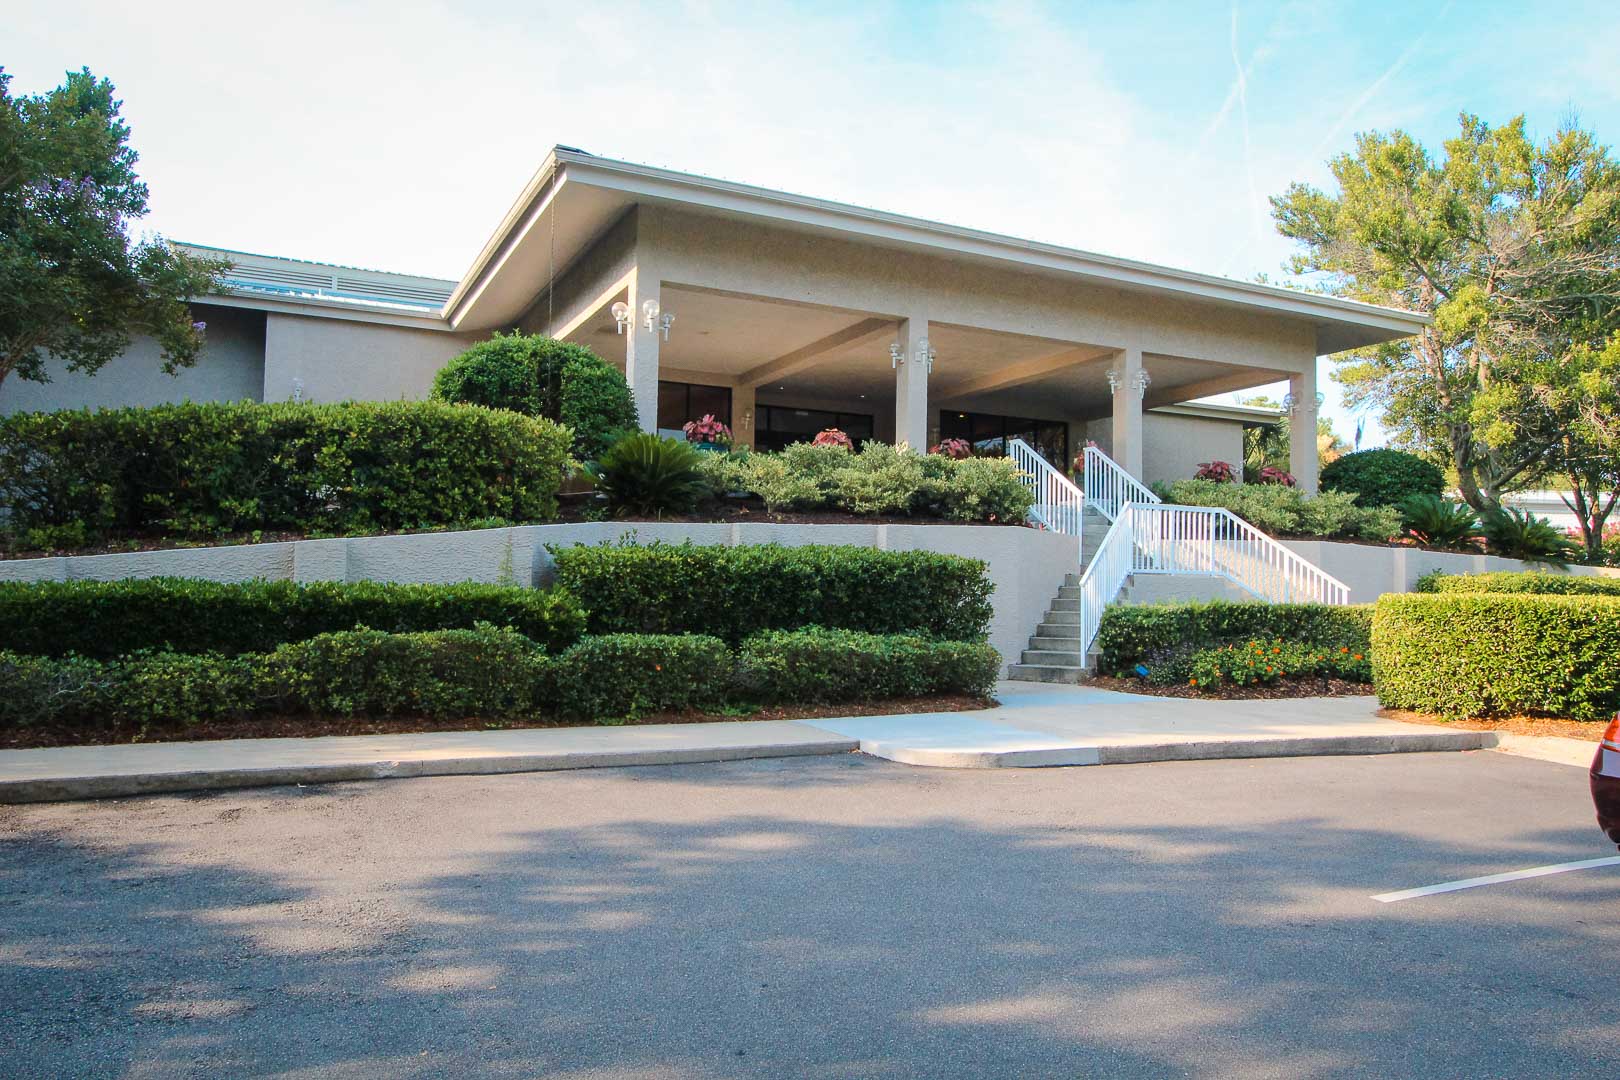 An exterior view of the lobby at VRI's Players Club Resort in Hilton Head Island, South Carolina.